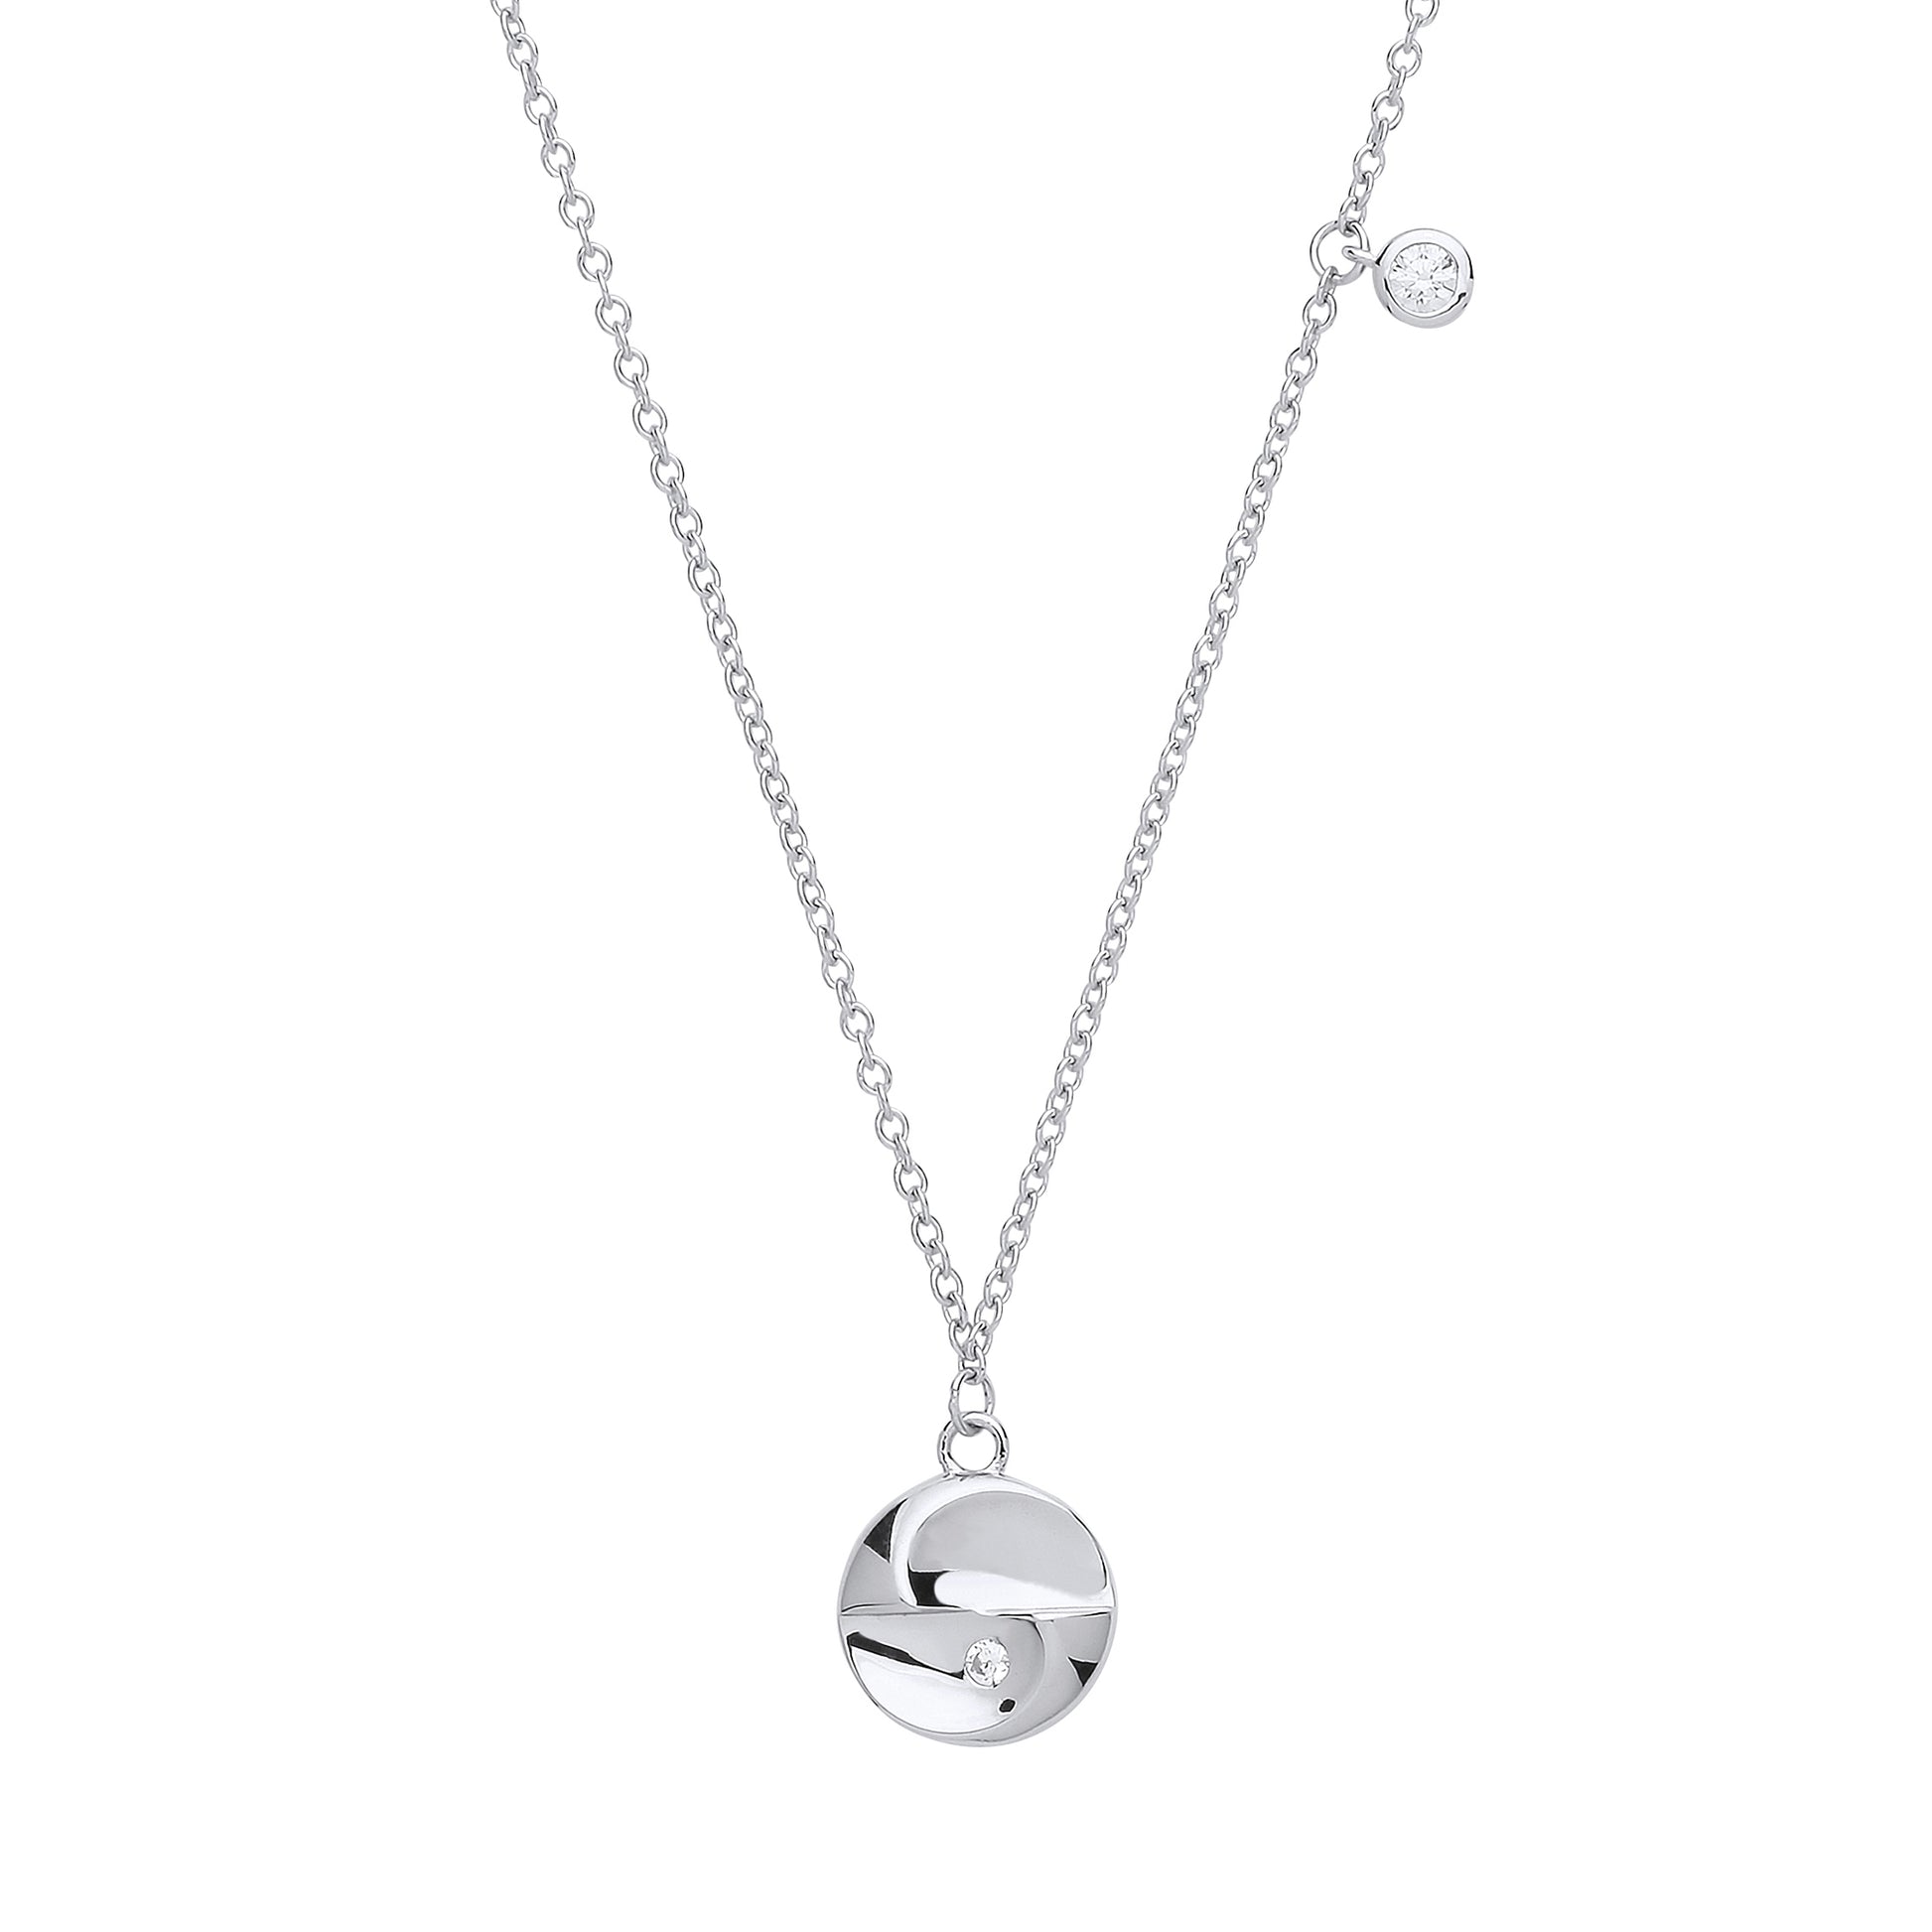 Silver  CZ Concave Disc Charm Necklace 18 inch - GVK252